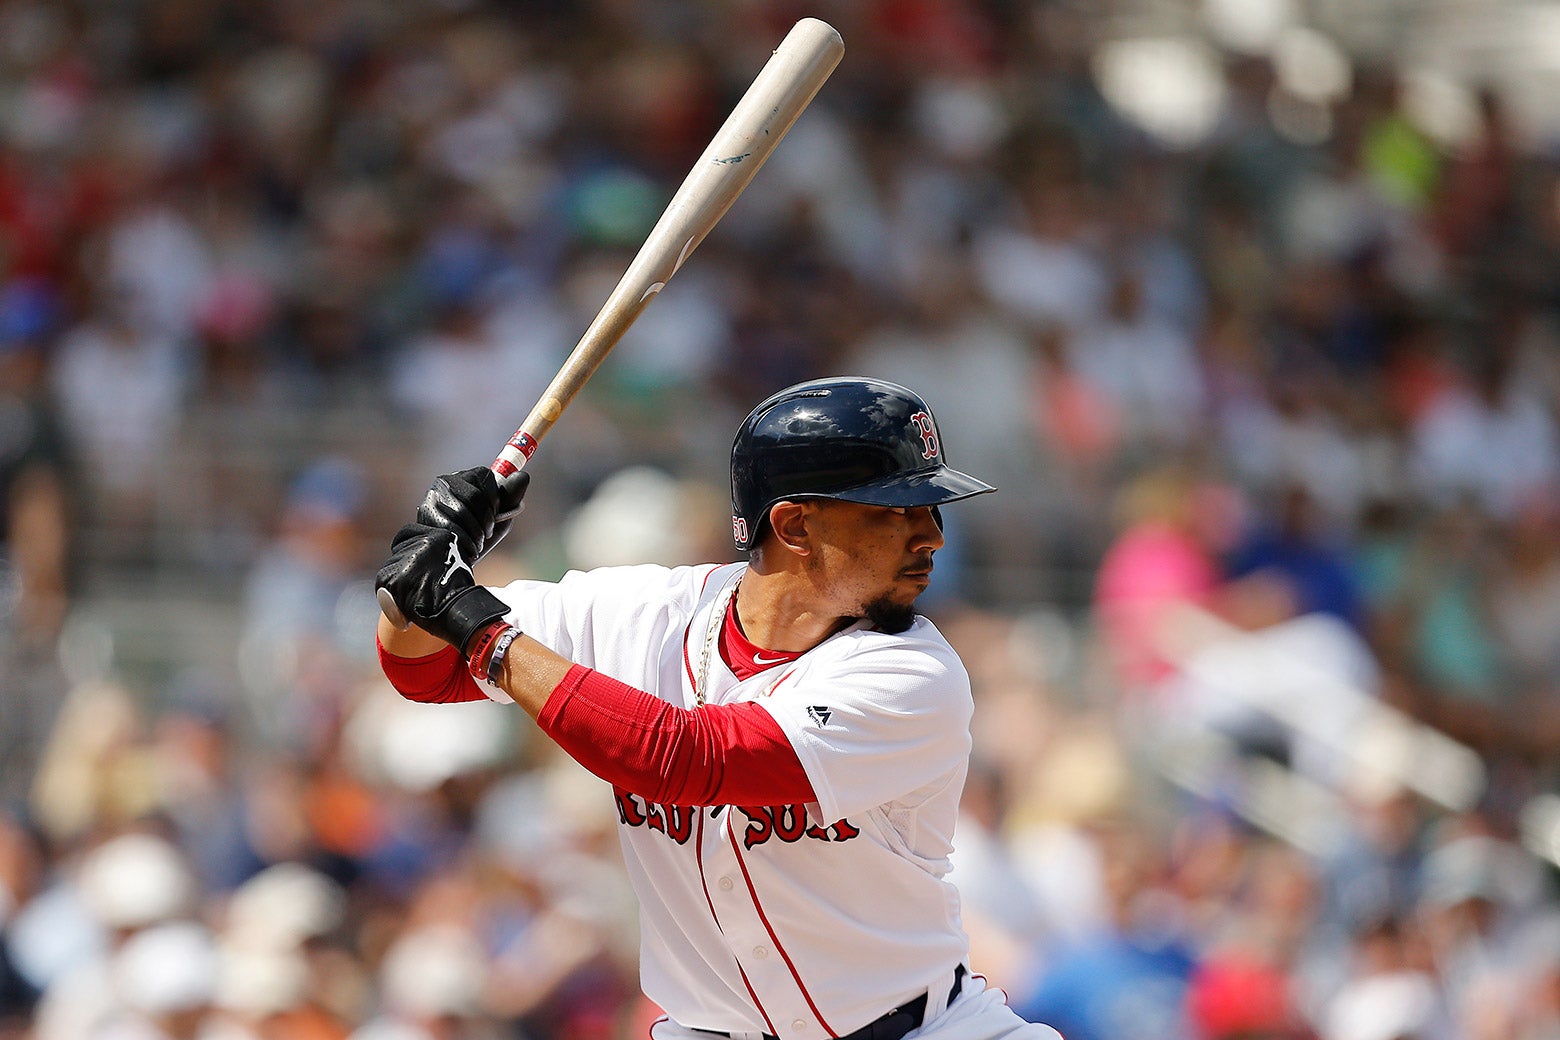 Mookie Betts of the Boston Red Sox waits at bat against the New York Mets on March 9 in Fort Myers, Florida.